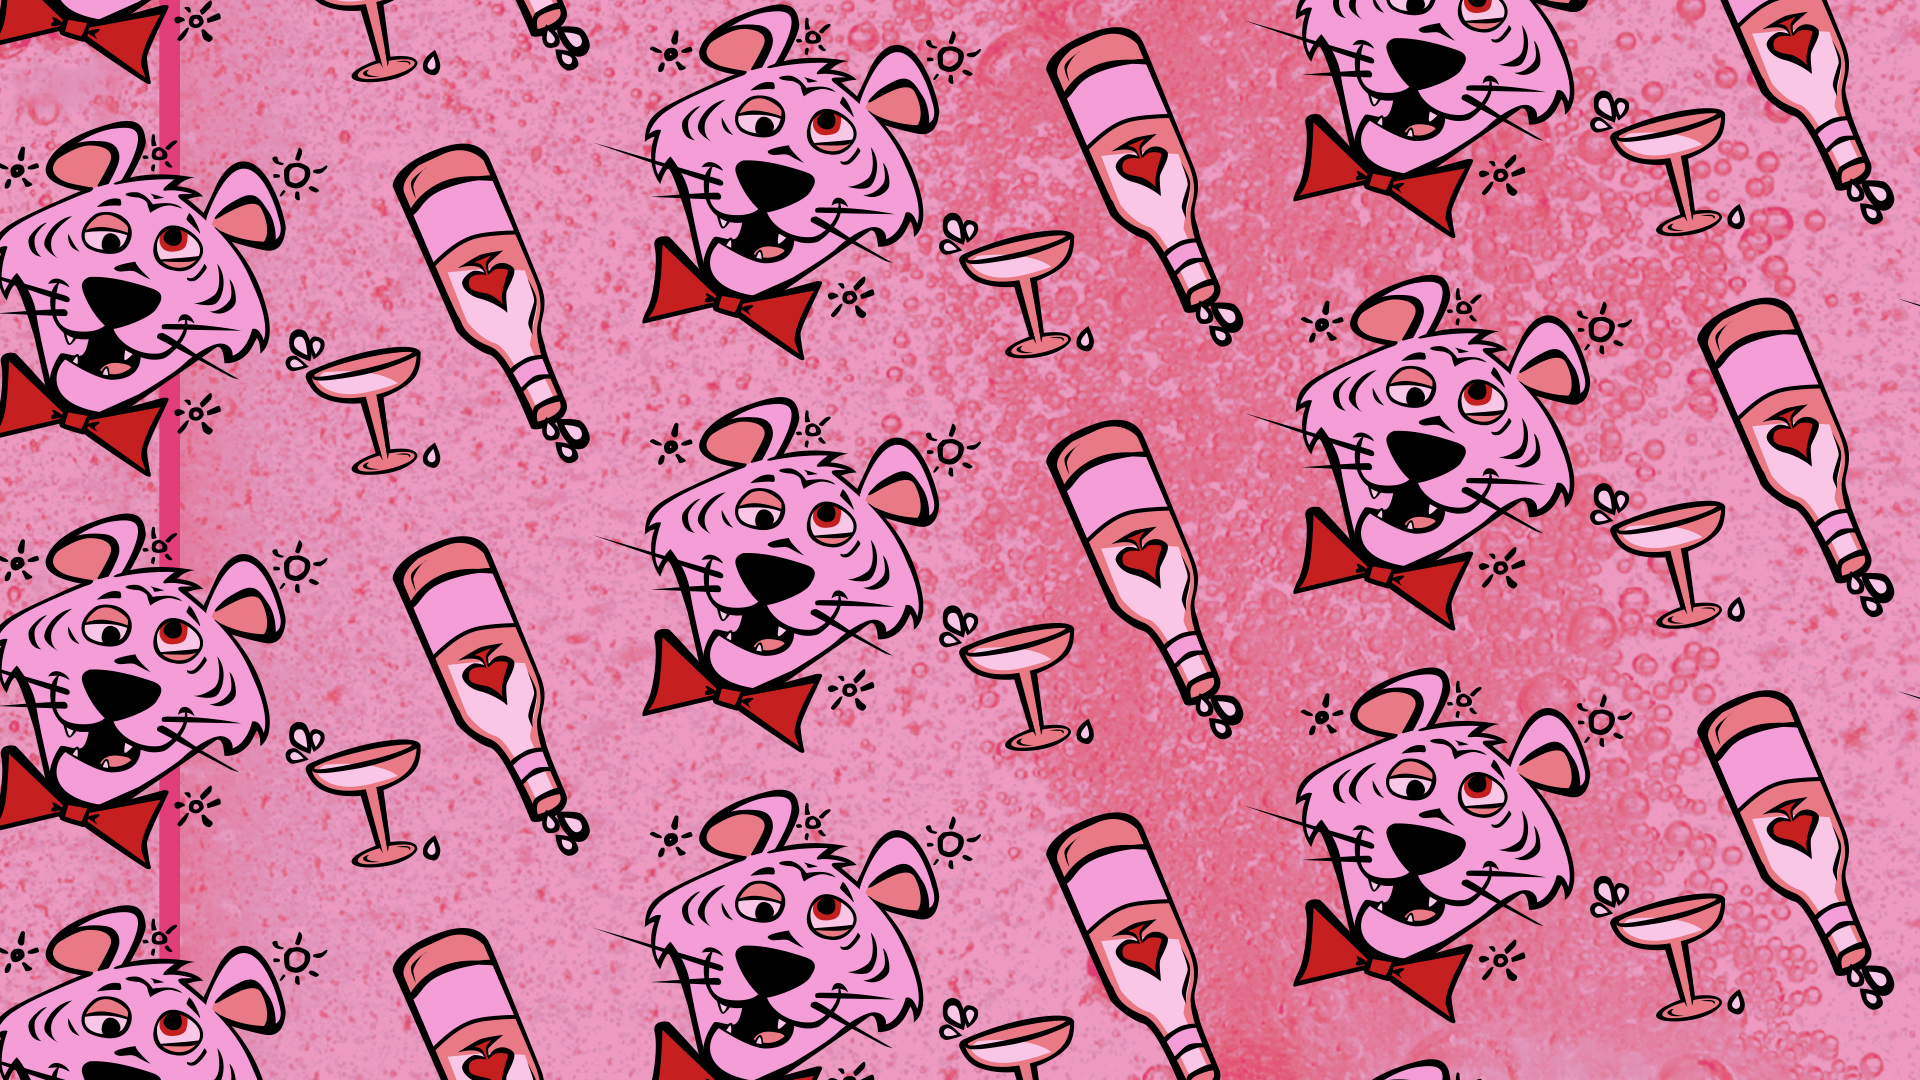 pink tiger character, drinks pink champagne all over pattern